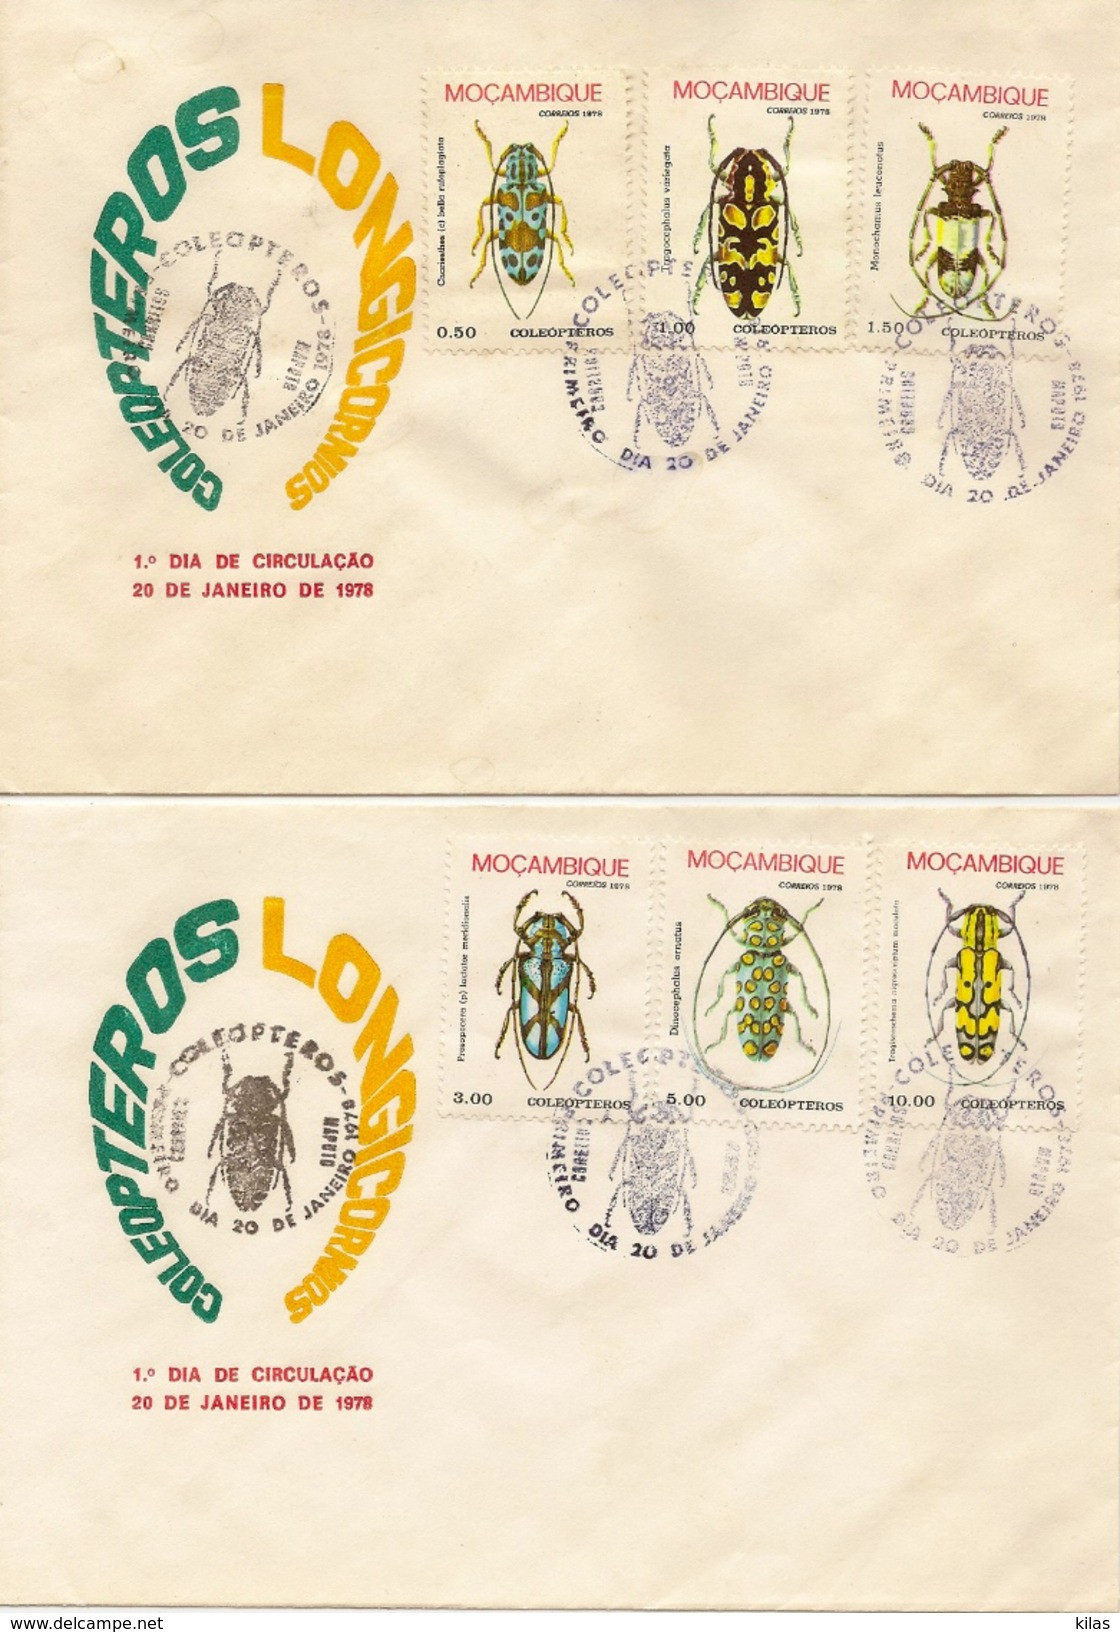 MOZAMBIQUE 1978 FDC Insects - Mozambique